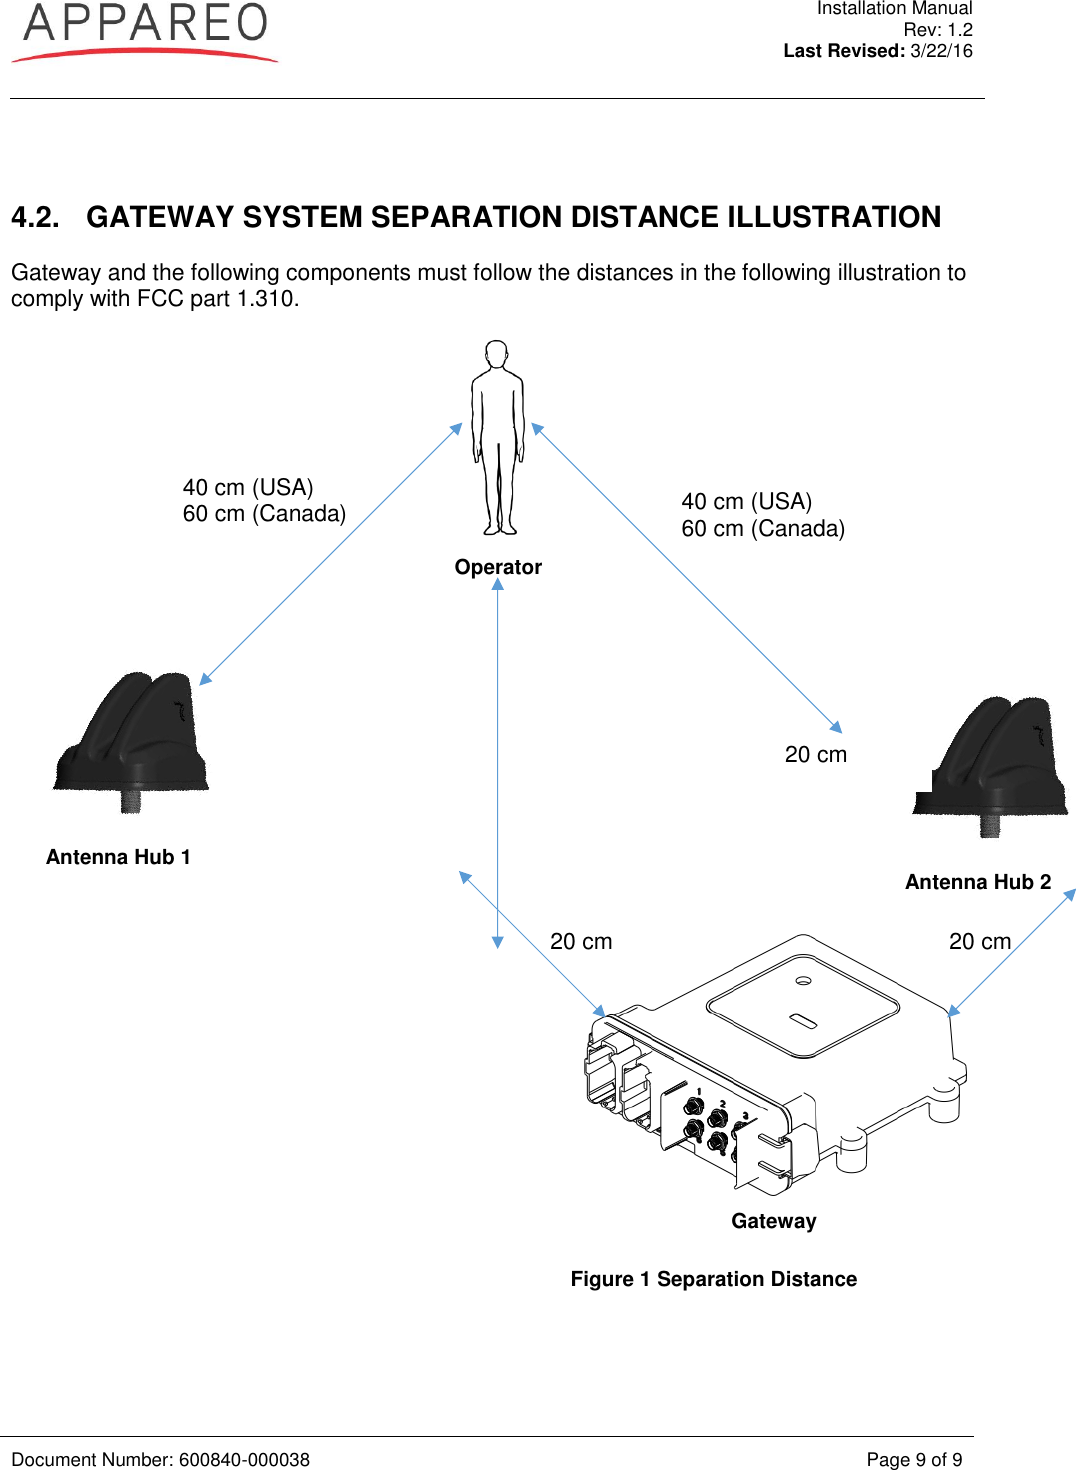  Installation Manual Rev: 1.2 Last Revised: 3/22/16   Document Number: 600840-000038 Page 9 of 9    4.2.  GATEWAY SYSTEM SEPARATION DISTANCE ILLUSTRATION Gateway and the following components must follow the distances in the following illustration to comply with FCC part 1.310.  Operator                                                             Antenna Hub 1  Antenna Hub 2 Gateway 40 cm (USA) 60 cm (Canada)  20 cm  20 cm  20 cm  Figure 1 Separation Distance 40 cm (USA) 60 cm (Canada)  